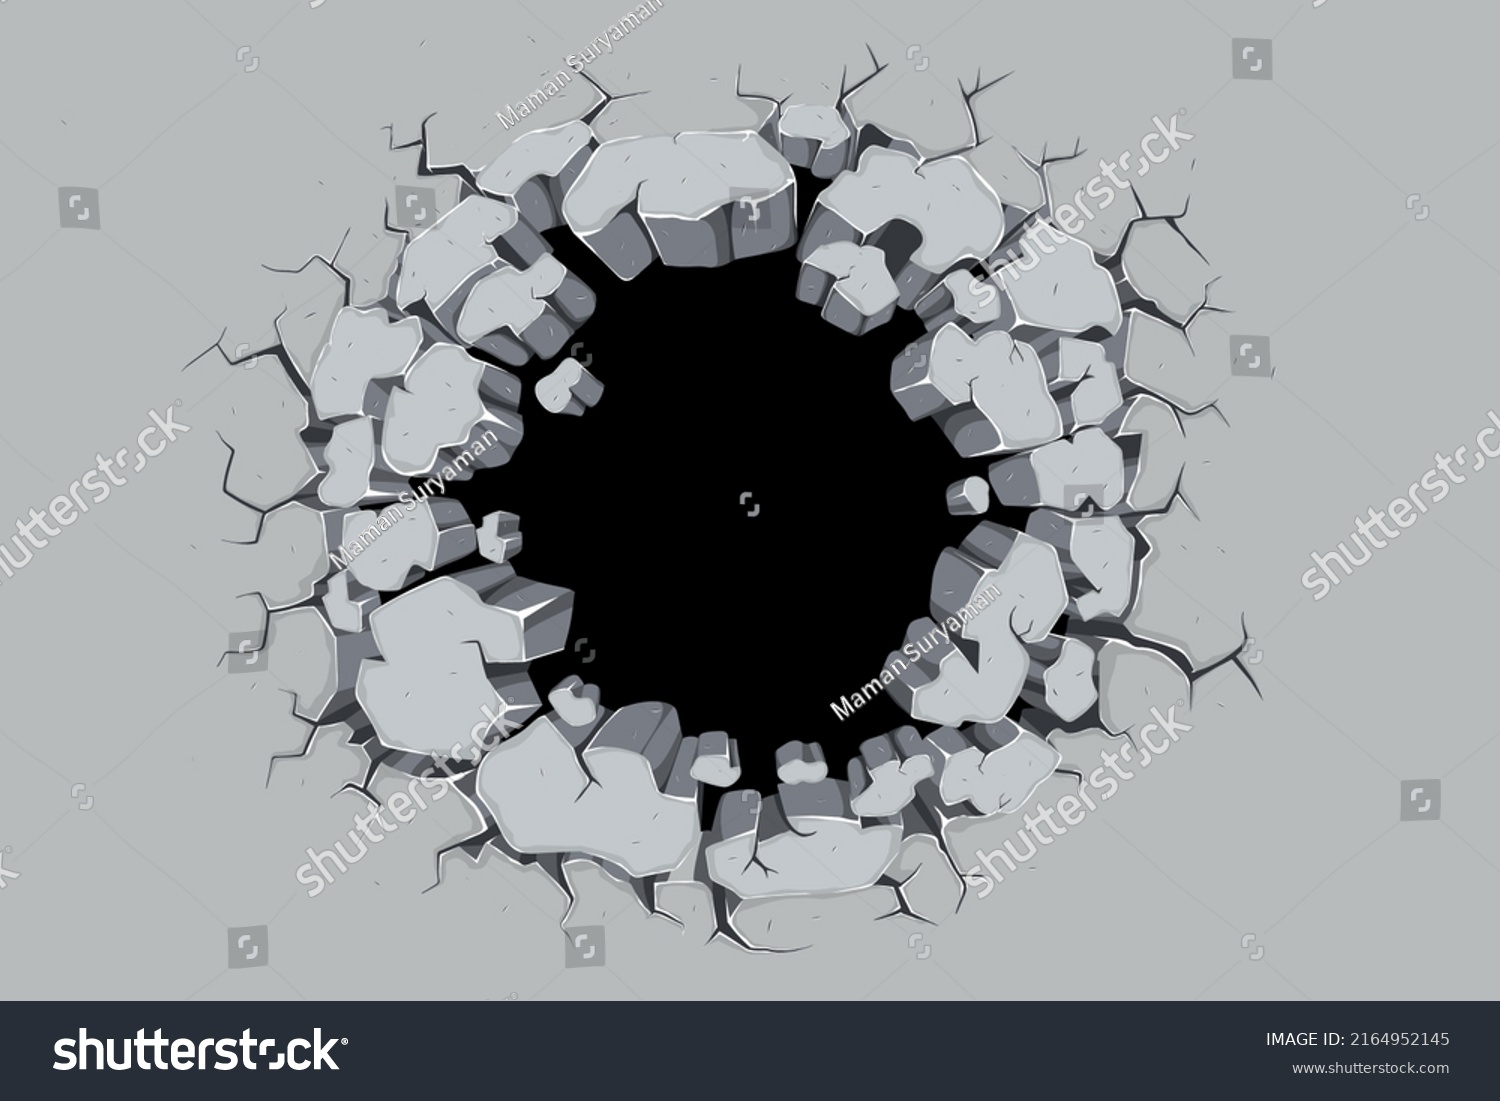 47 Fallback ground Images, Stock Photos & Vectors | Shutterstock